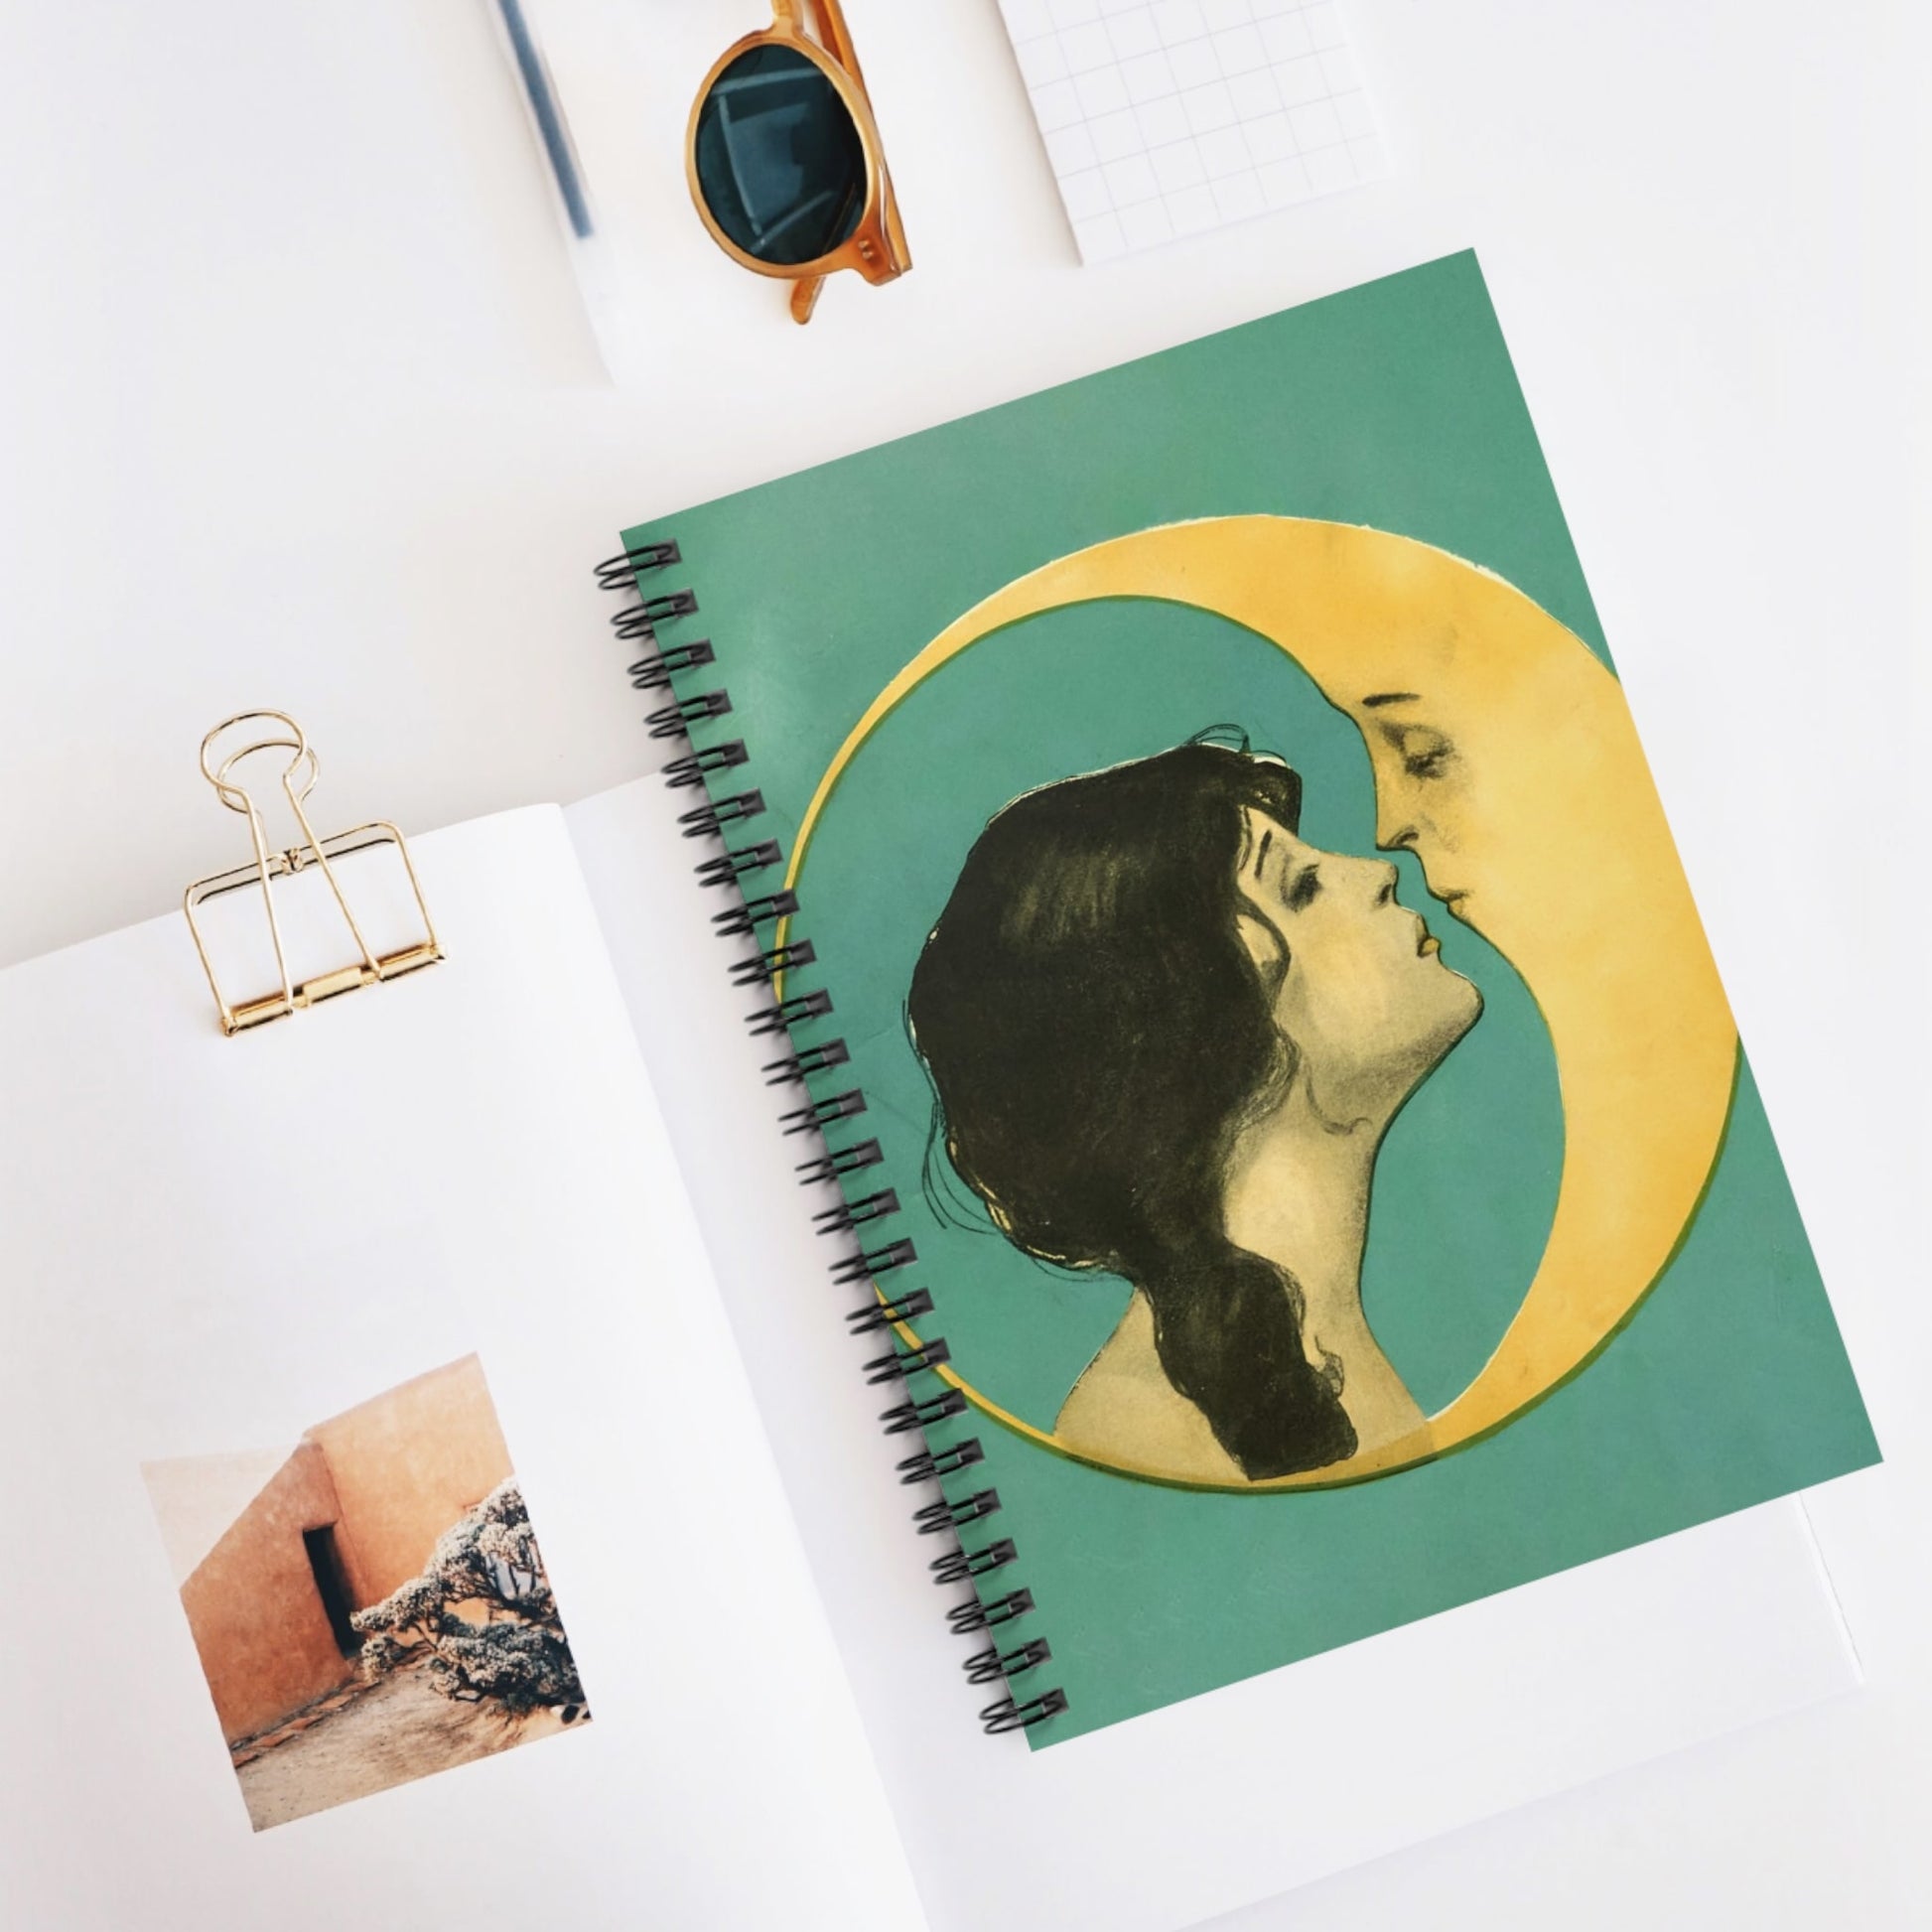 Woman Kissing the Moon Spiral Notebook Displayed on Desk